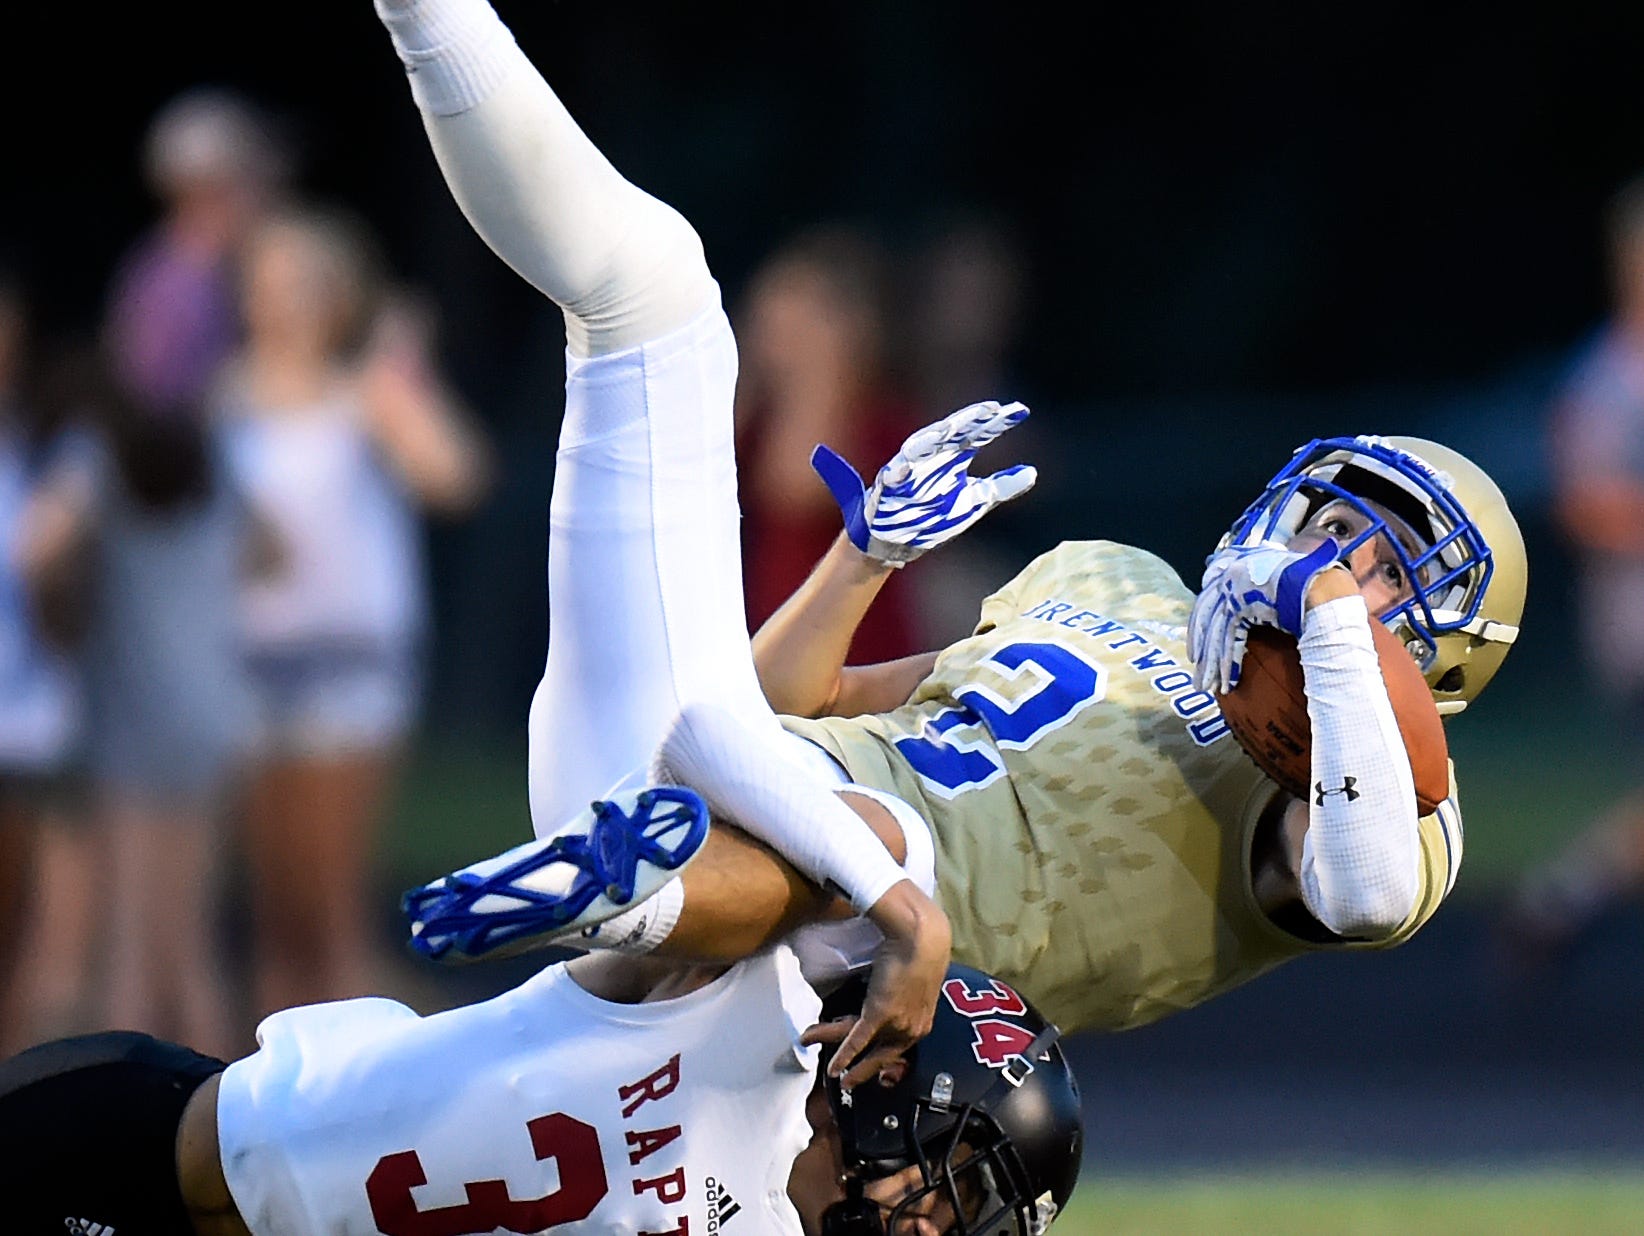 Brentwood wide receiver Parker Bullion (2) is upended by Ravenwood cornerback Elijah Dryer (34) after Bullion caught a pass during the first of an high school football game on Friday, Aug. 26, 2016, in Brentwood, Tenn.